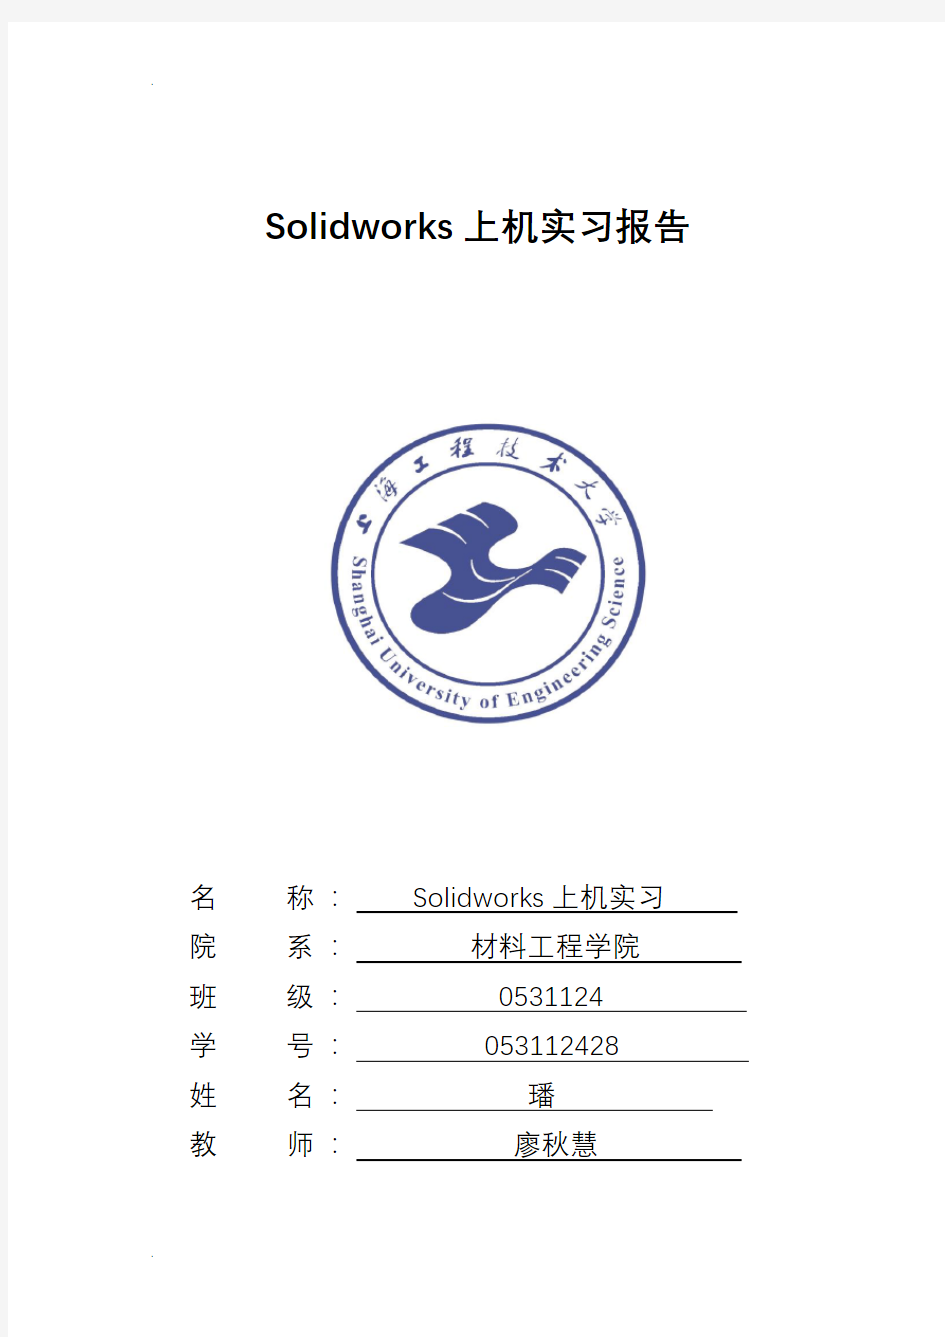 Solidworks实习报告